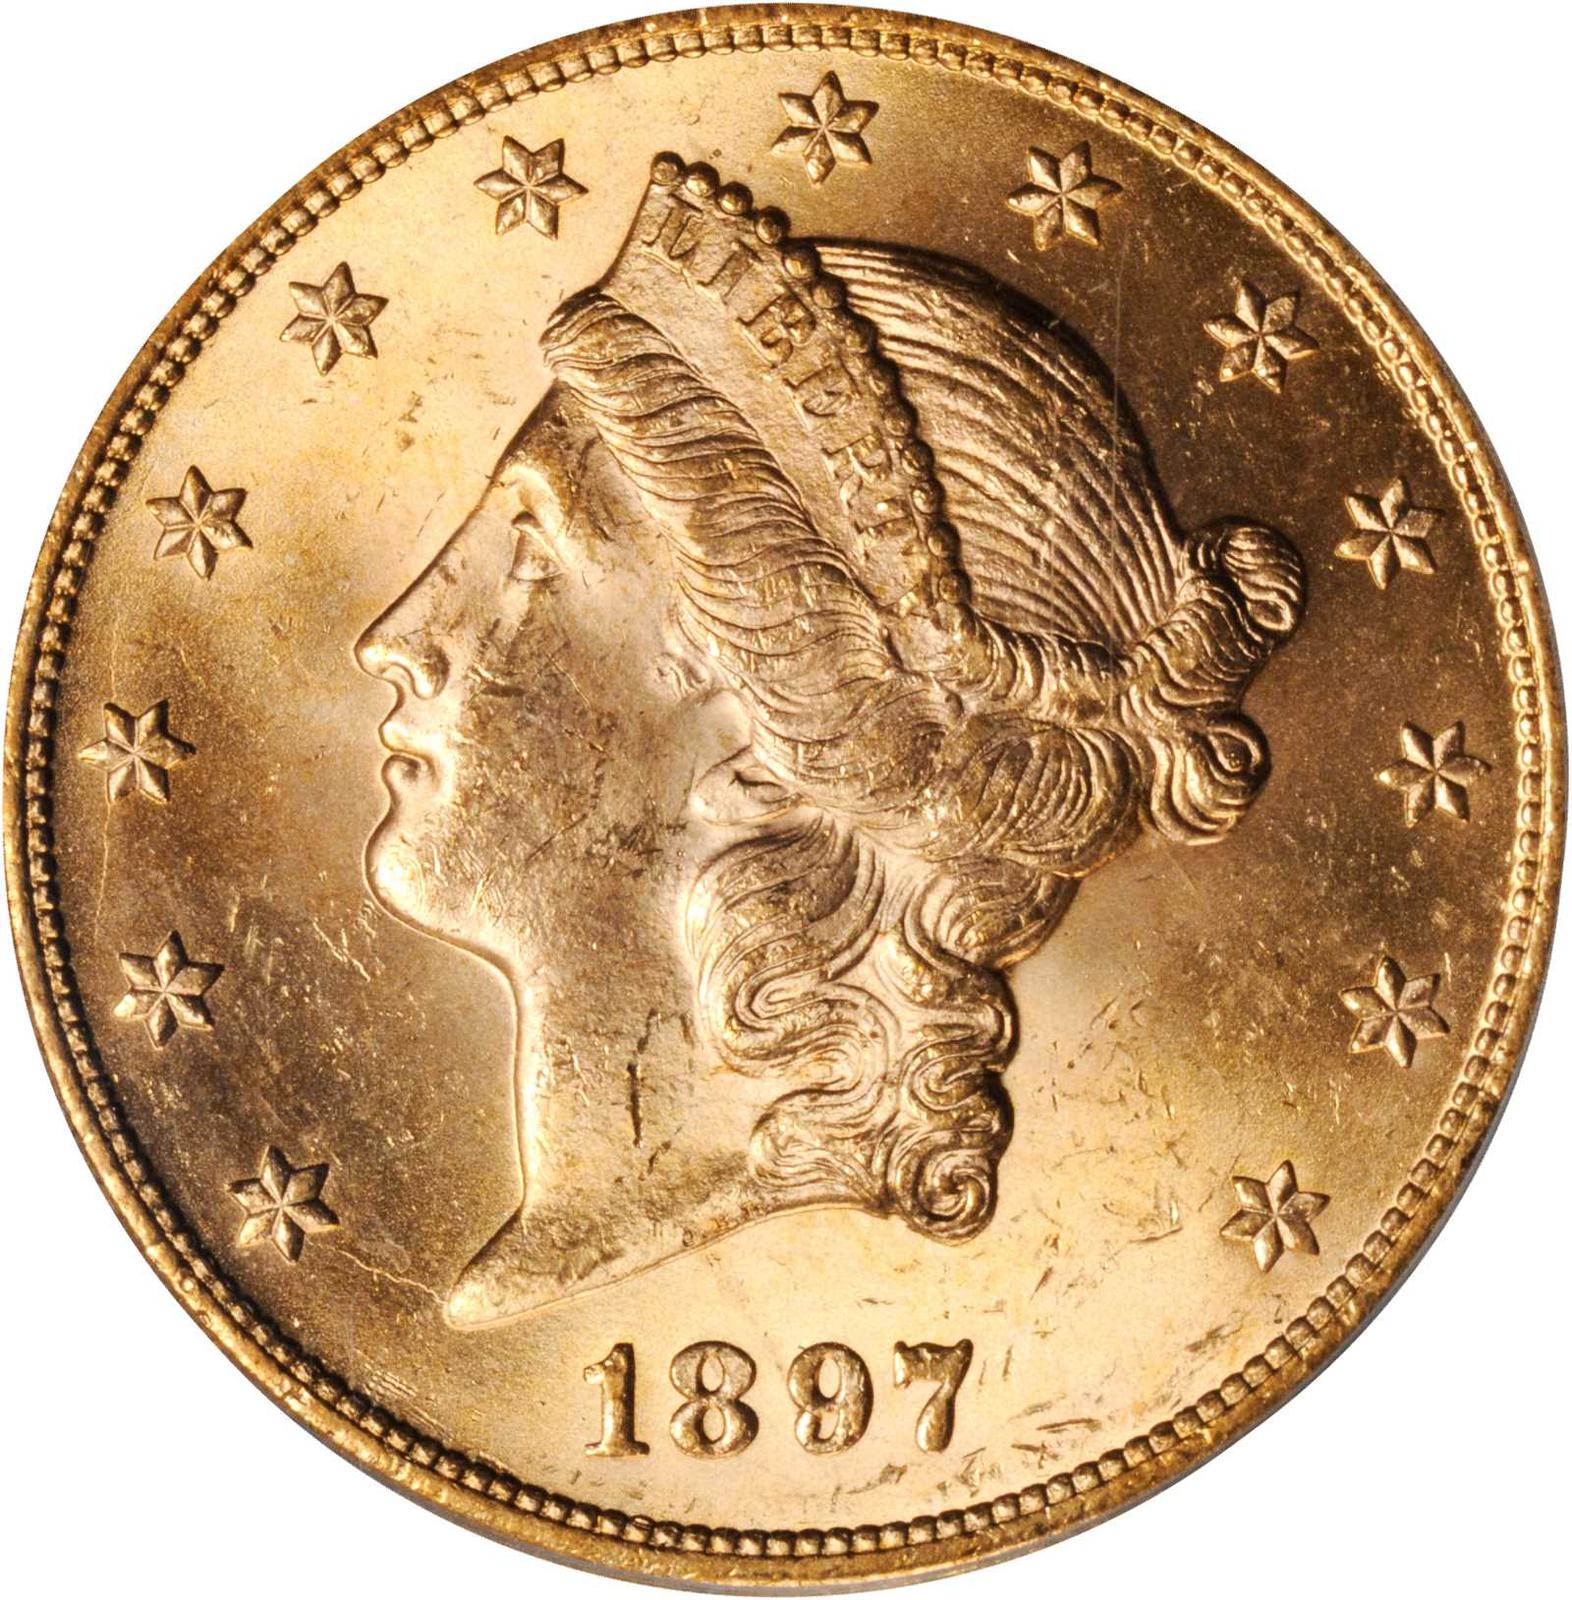 Value of 1897 $20 Liberty Double Eagle | Sell Rare Coins